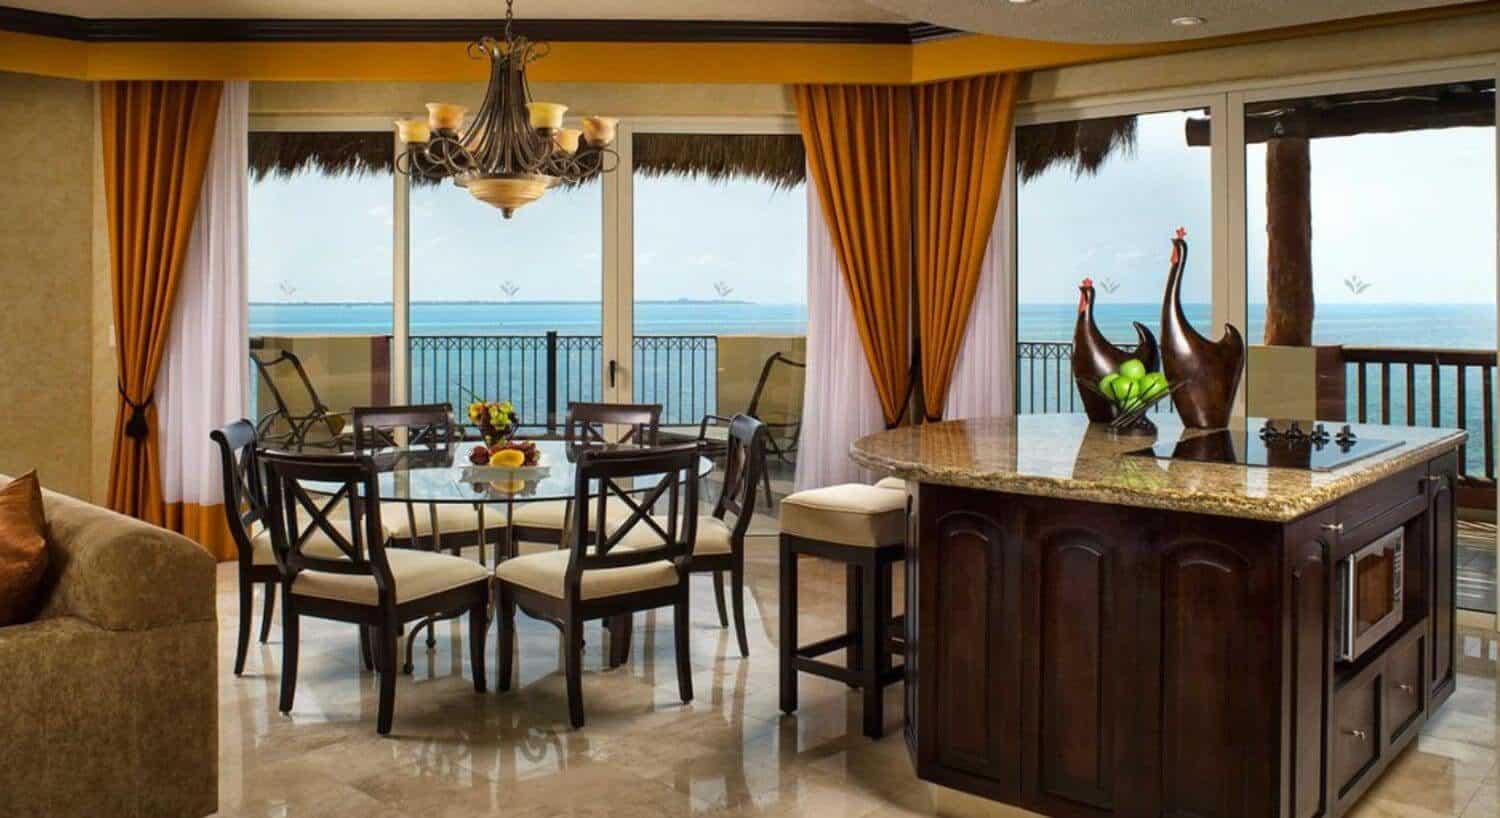 A spacious living area with a kitchen island, barstools, a round glass dining table with plush chairs, a sofa, and sliding doors that lead out to a wrap around terrace with sweeping ocean views.